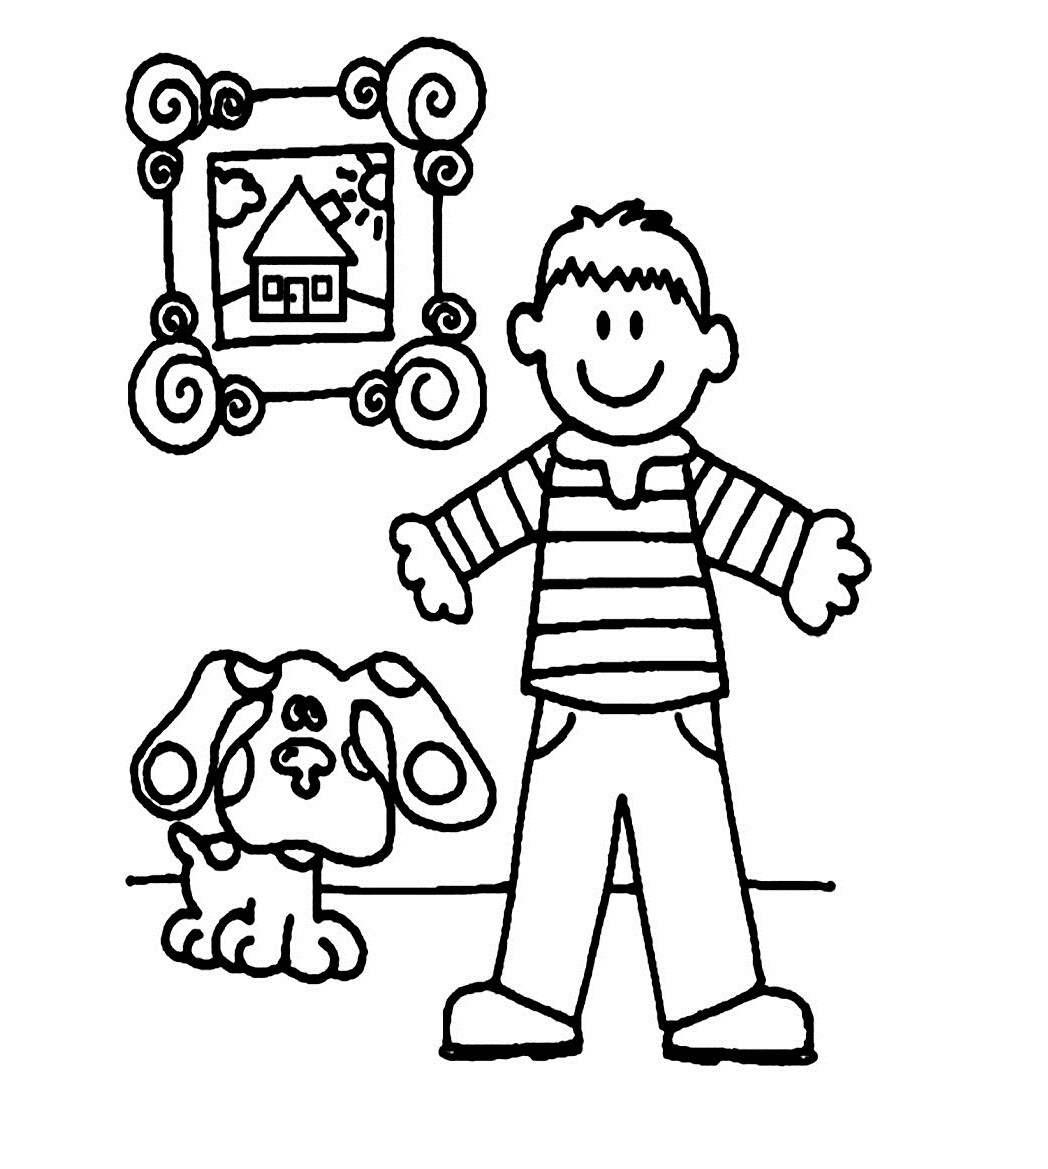 Boys Kids Coloring Pages
 Free Printable Boy Coloring Pages For Kids